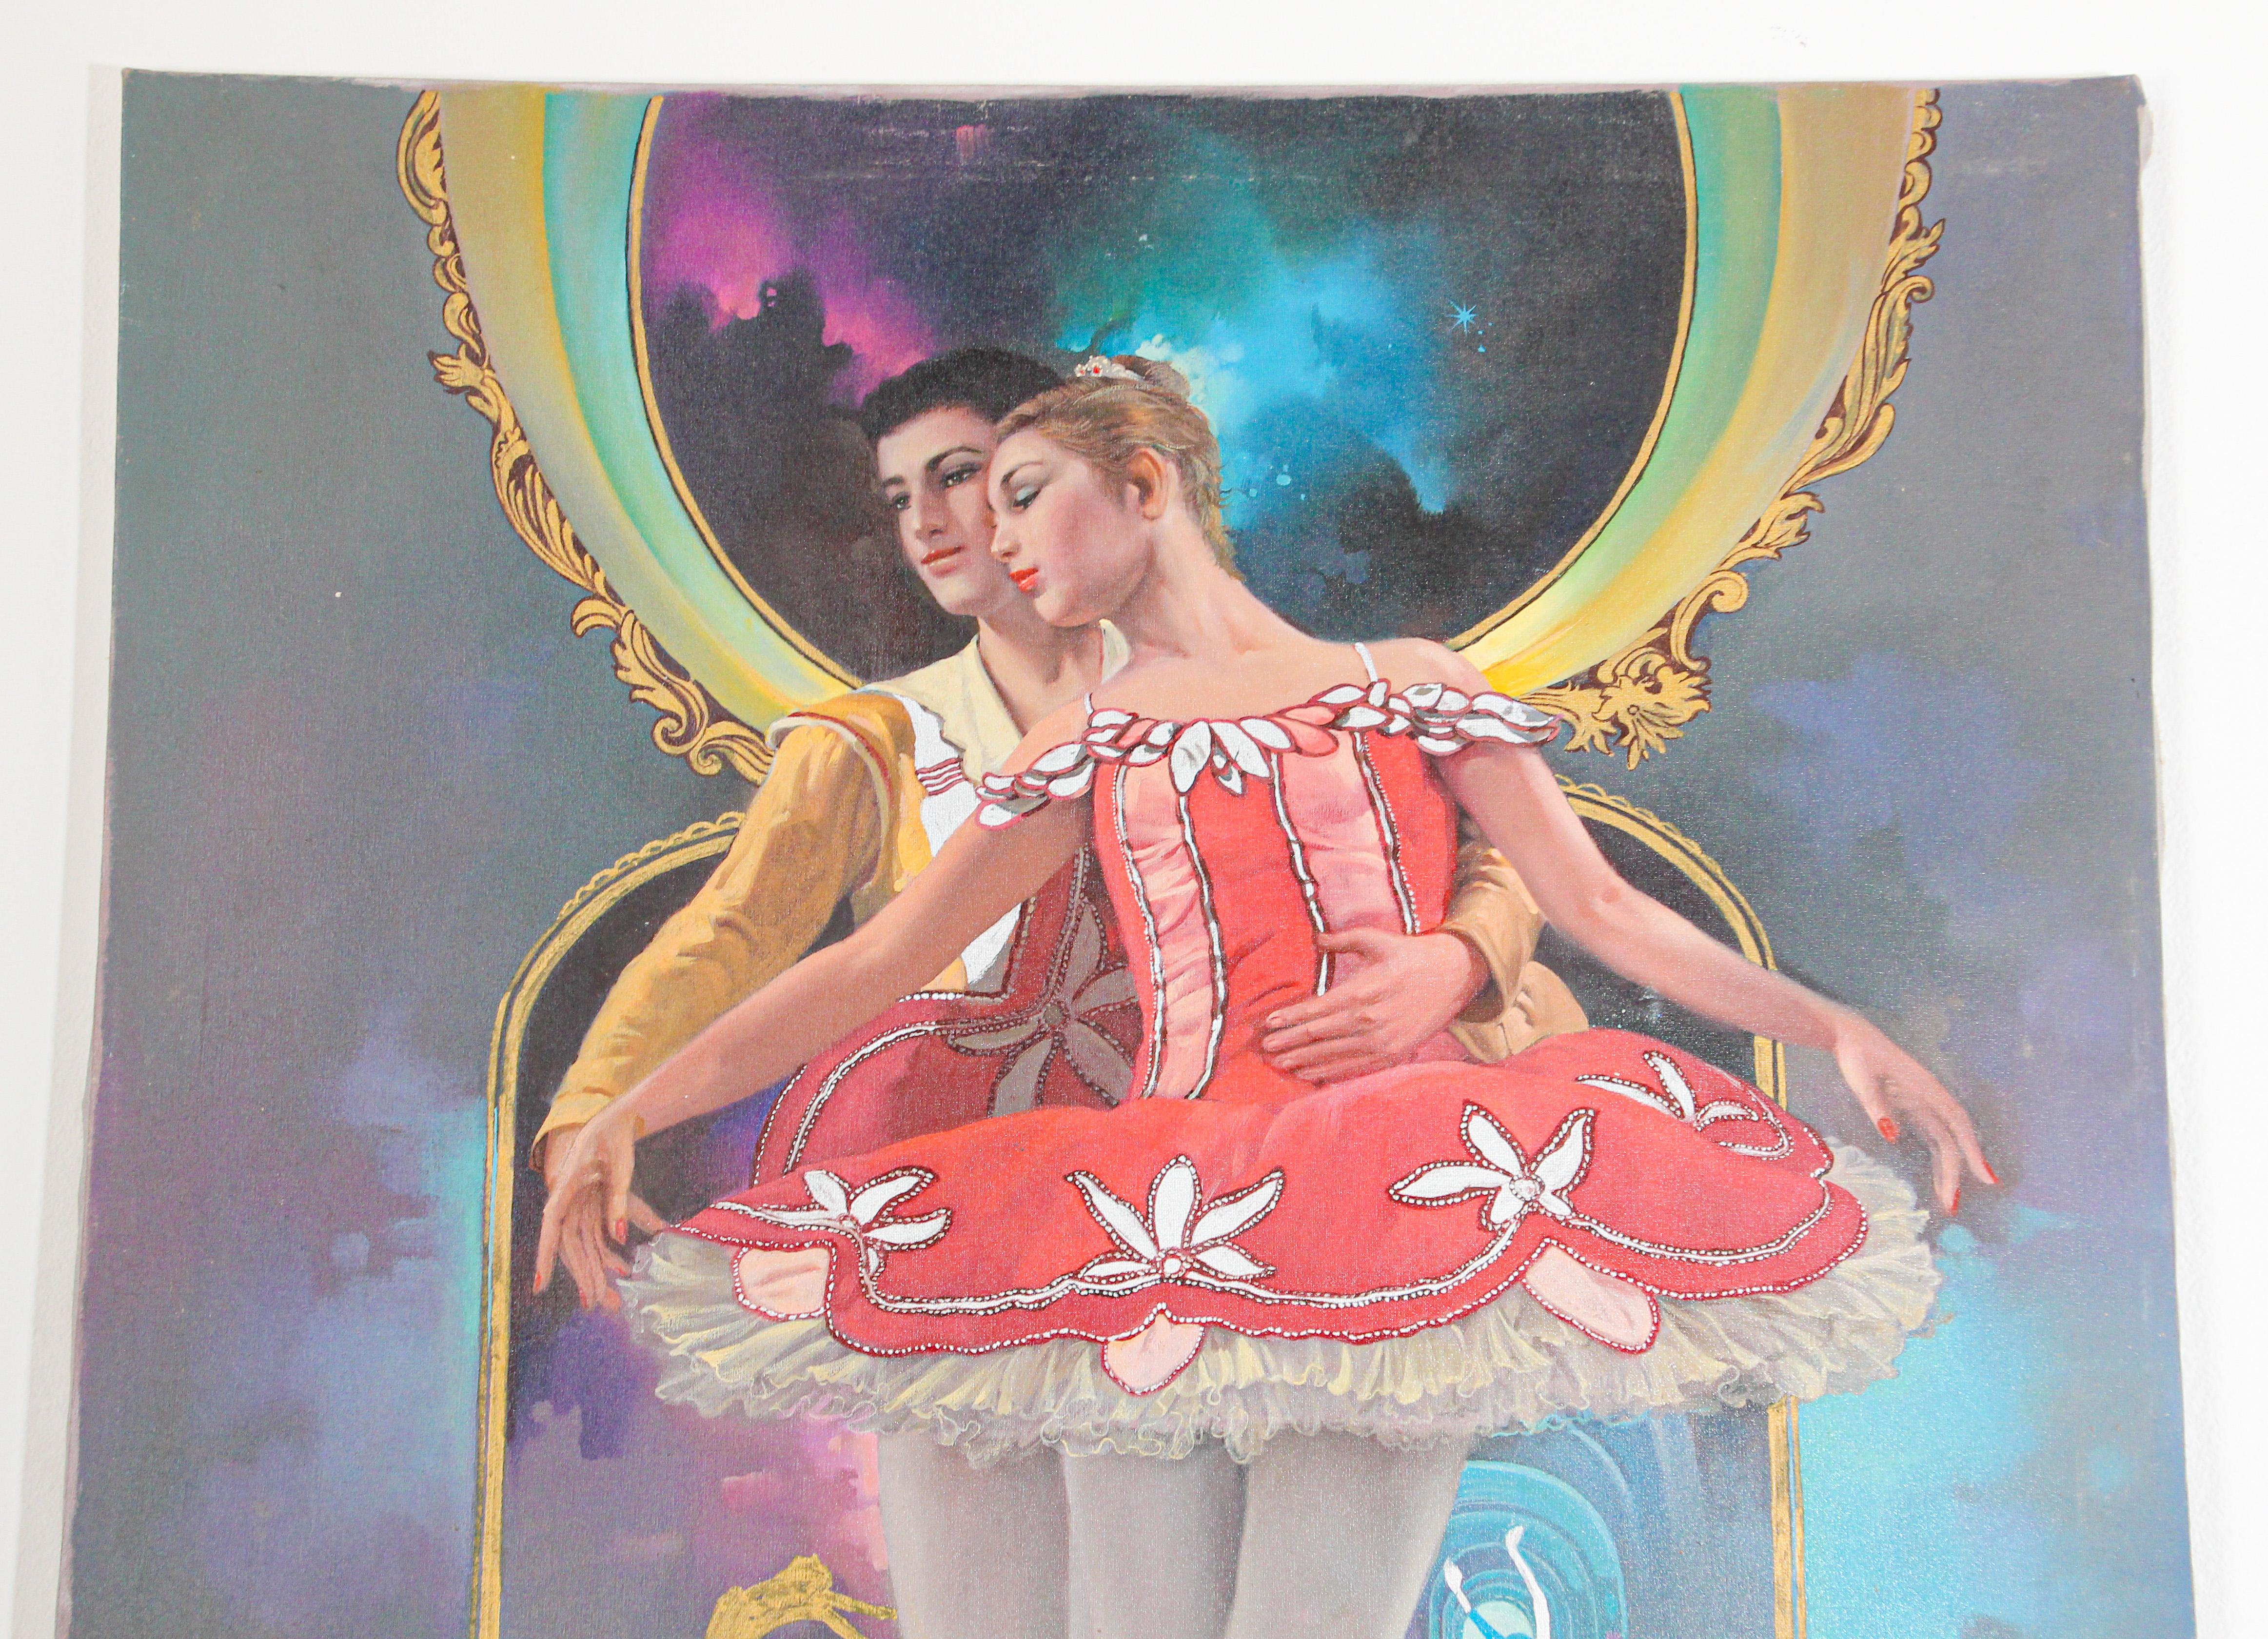 Oil painting on canvas classical Russian ballet dancers.
Russian classical ballet oil painting.
Painting is not old, not framed.
Signed on the left corner.